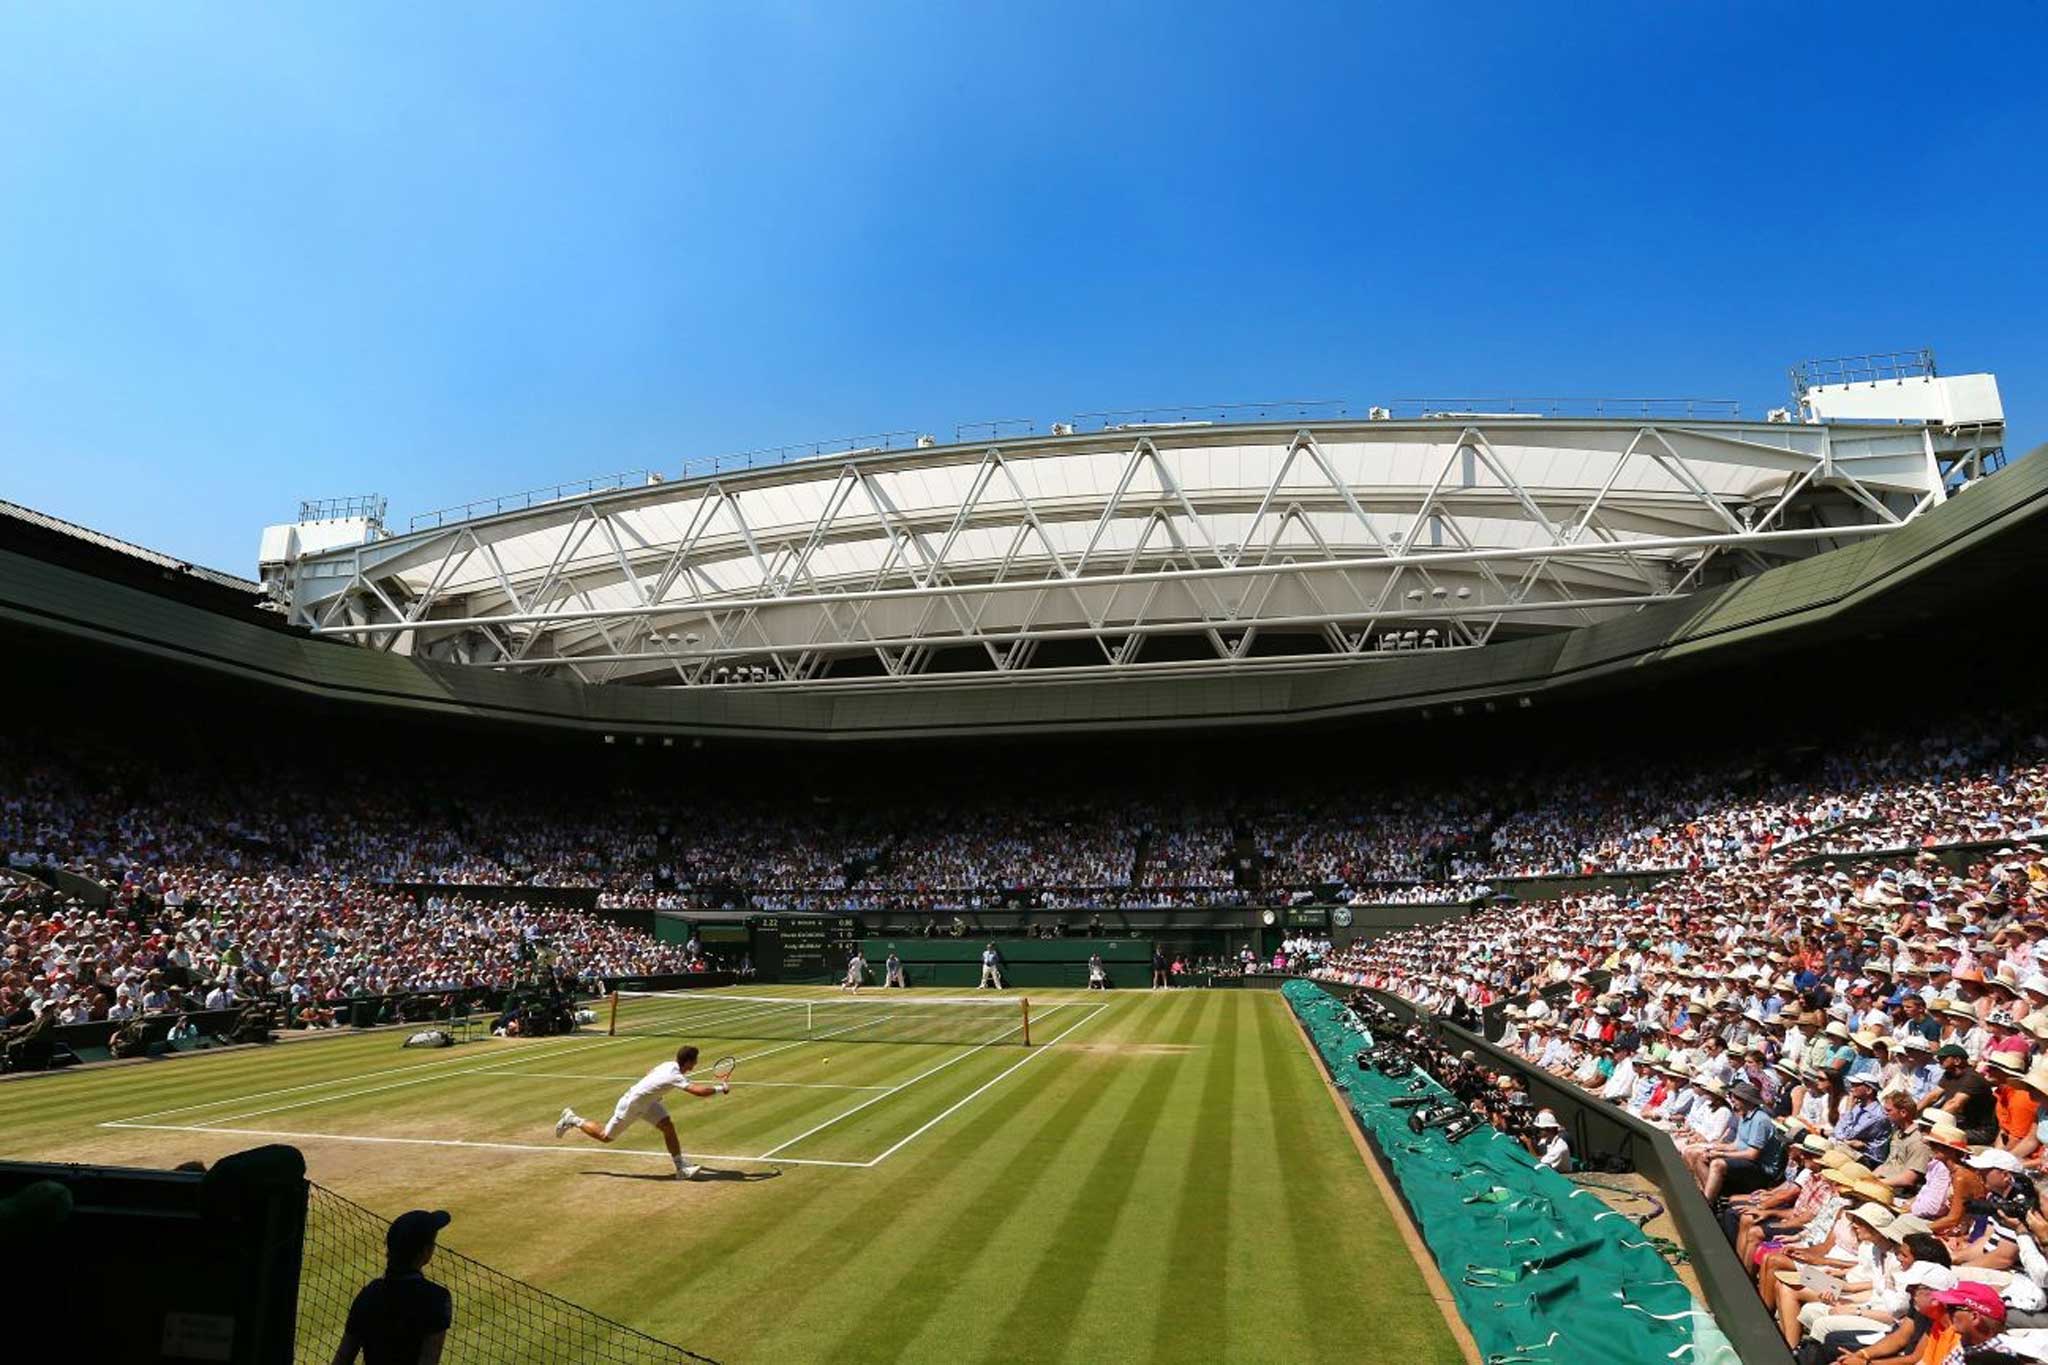 Sony is hoping to attract fans of Wimbledon with its offer